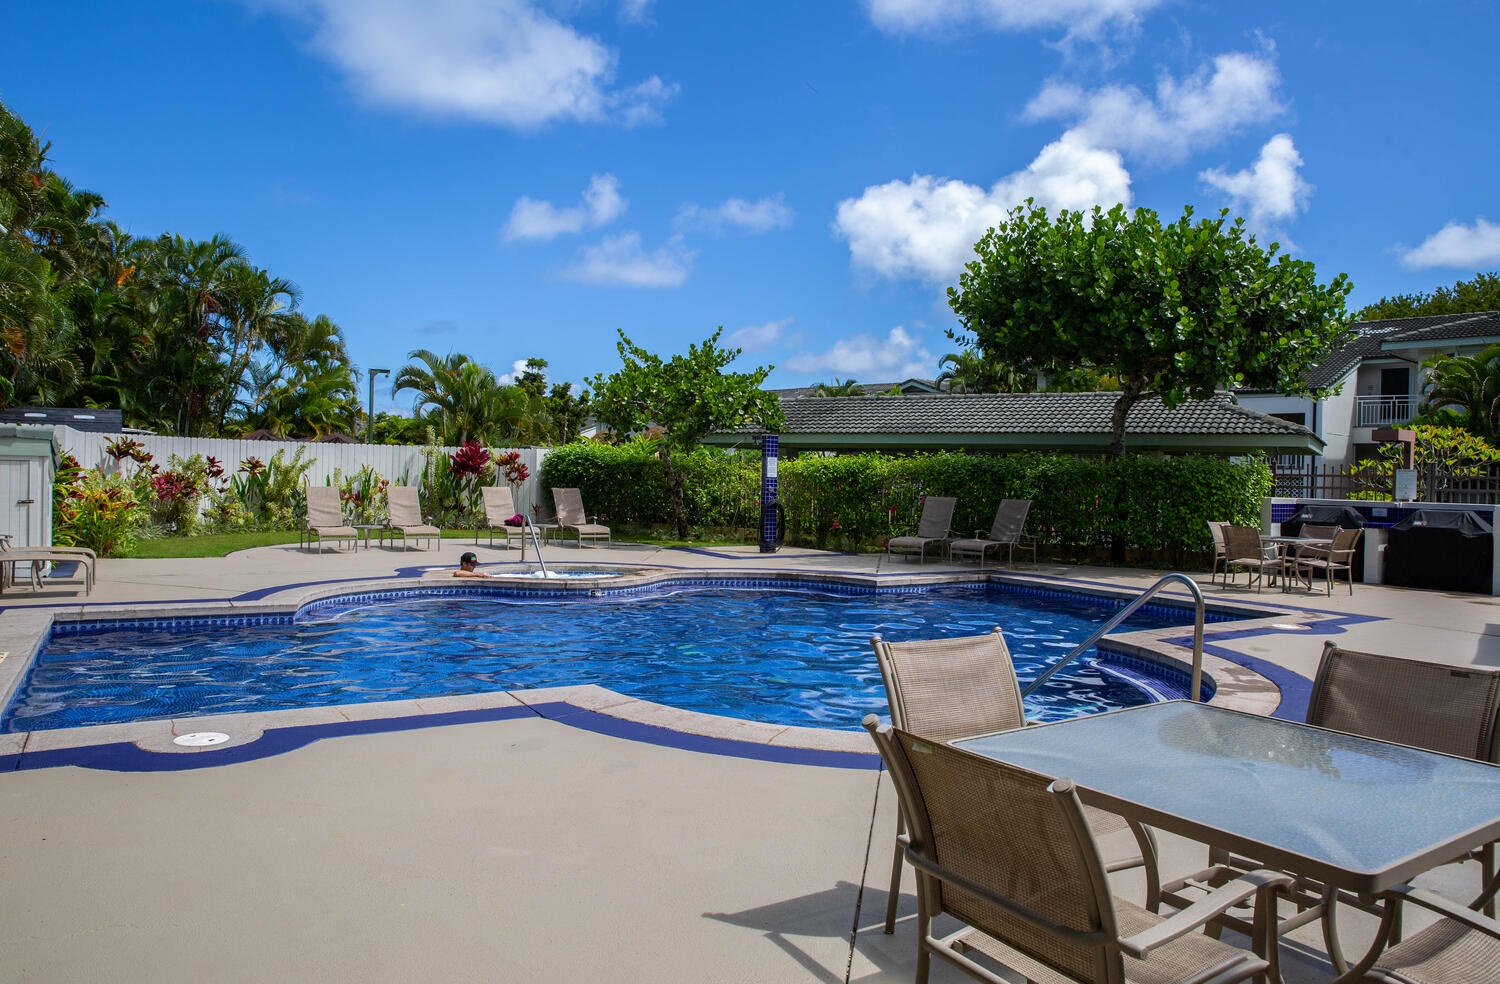 Princeville Vacation Rentals, Emmalani Court 414 - The community pool is perfect to take a dip or lounge in the sun